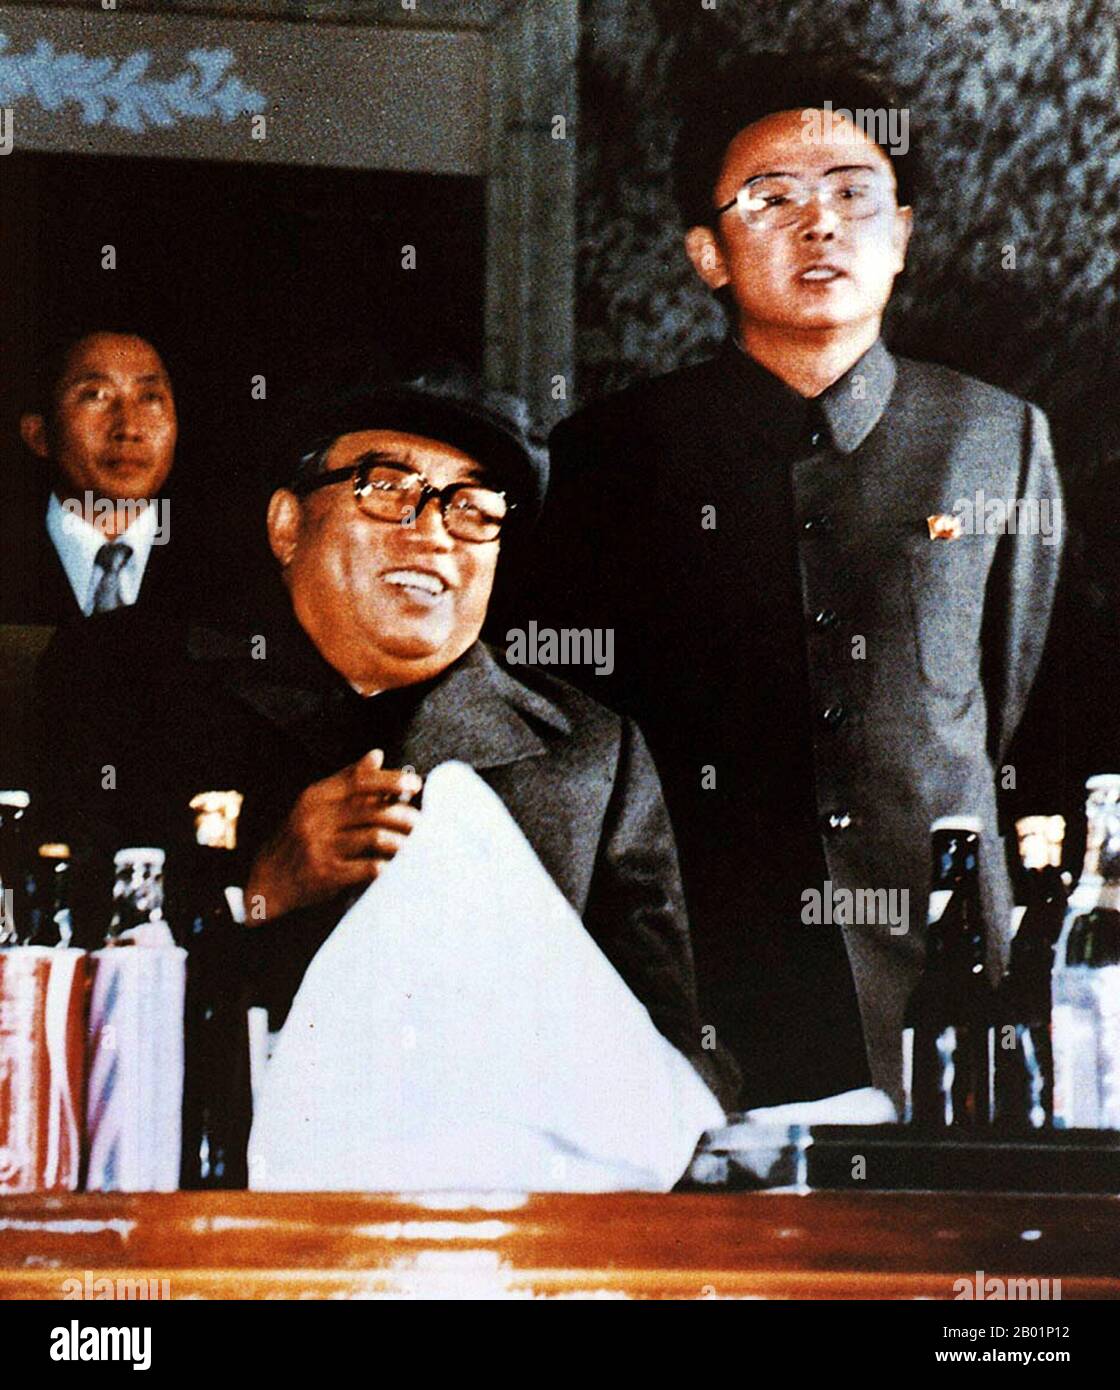 Korea: North Korean leader Kim Il Sung (seated) with his son and successor Kim Jong Il, Pyongyang, 1980.  Kim Il-sung (15 April 1912 - 8 July 1994) was a Korean communist politician who ruled North Korea, officially the Democratic People's Republic of Korea, from its establishment in 1948 until his death in 1994. He held the posts of Prime Minister from 1948 to 1972 and President from 1972 to his death. He was also the leader of the Workers' Party of Korea from 1949 to 1994 (titled as chairman from 1949 to 1966 and as general secretary after 1966). Stock Photo